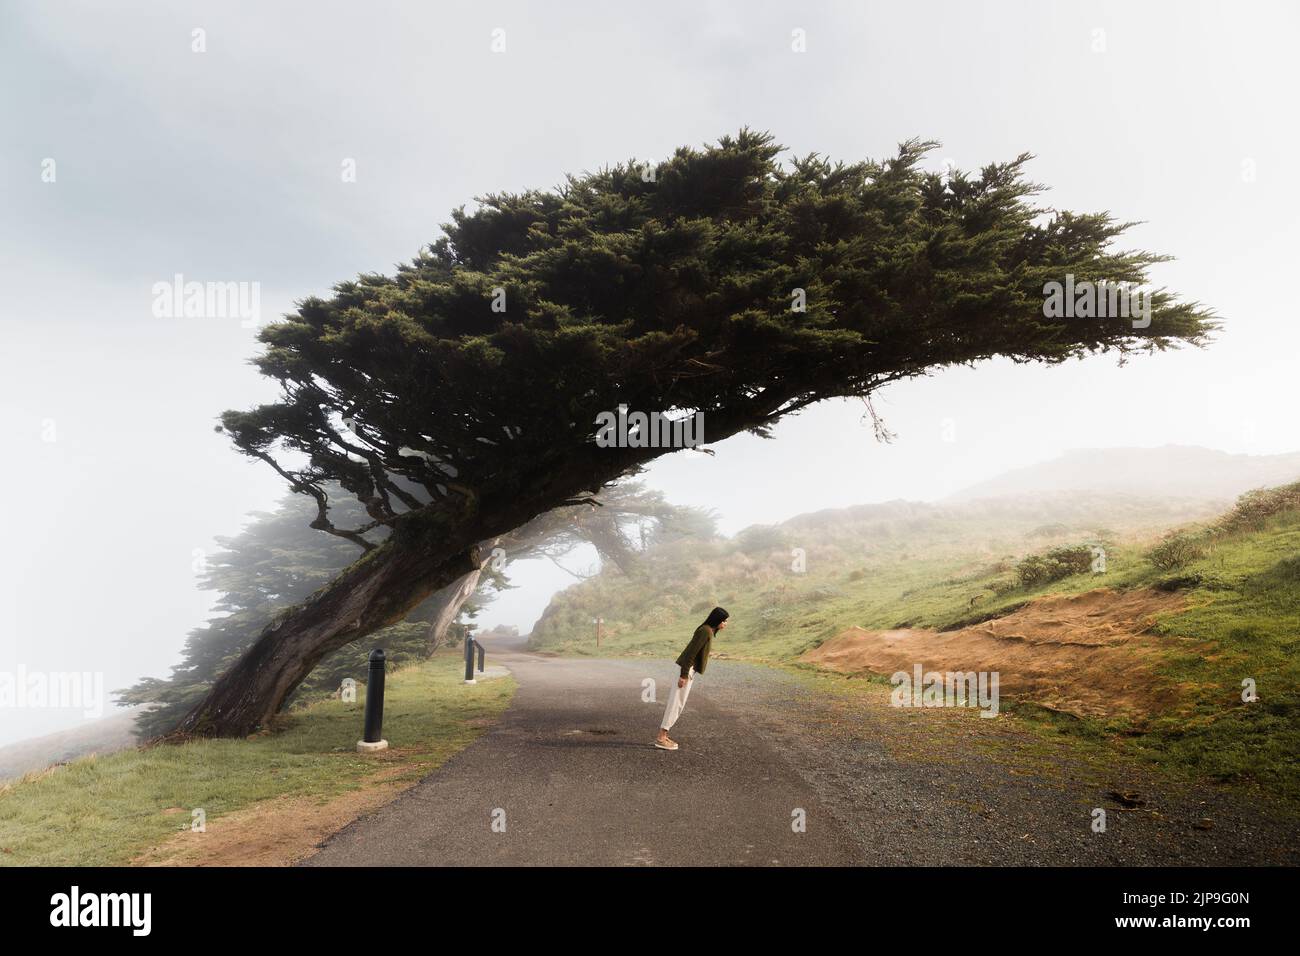 california, cypress tree, windswept trees, skew, schieflage, nature collection, californias, cypress trees, skews Stock Photo